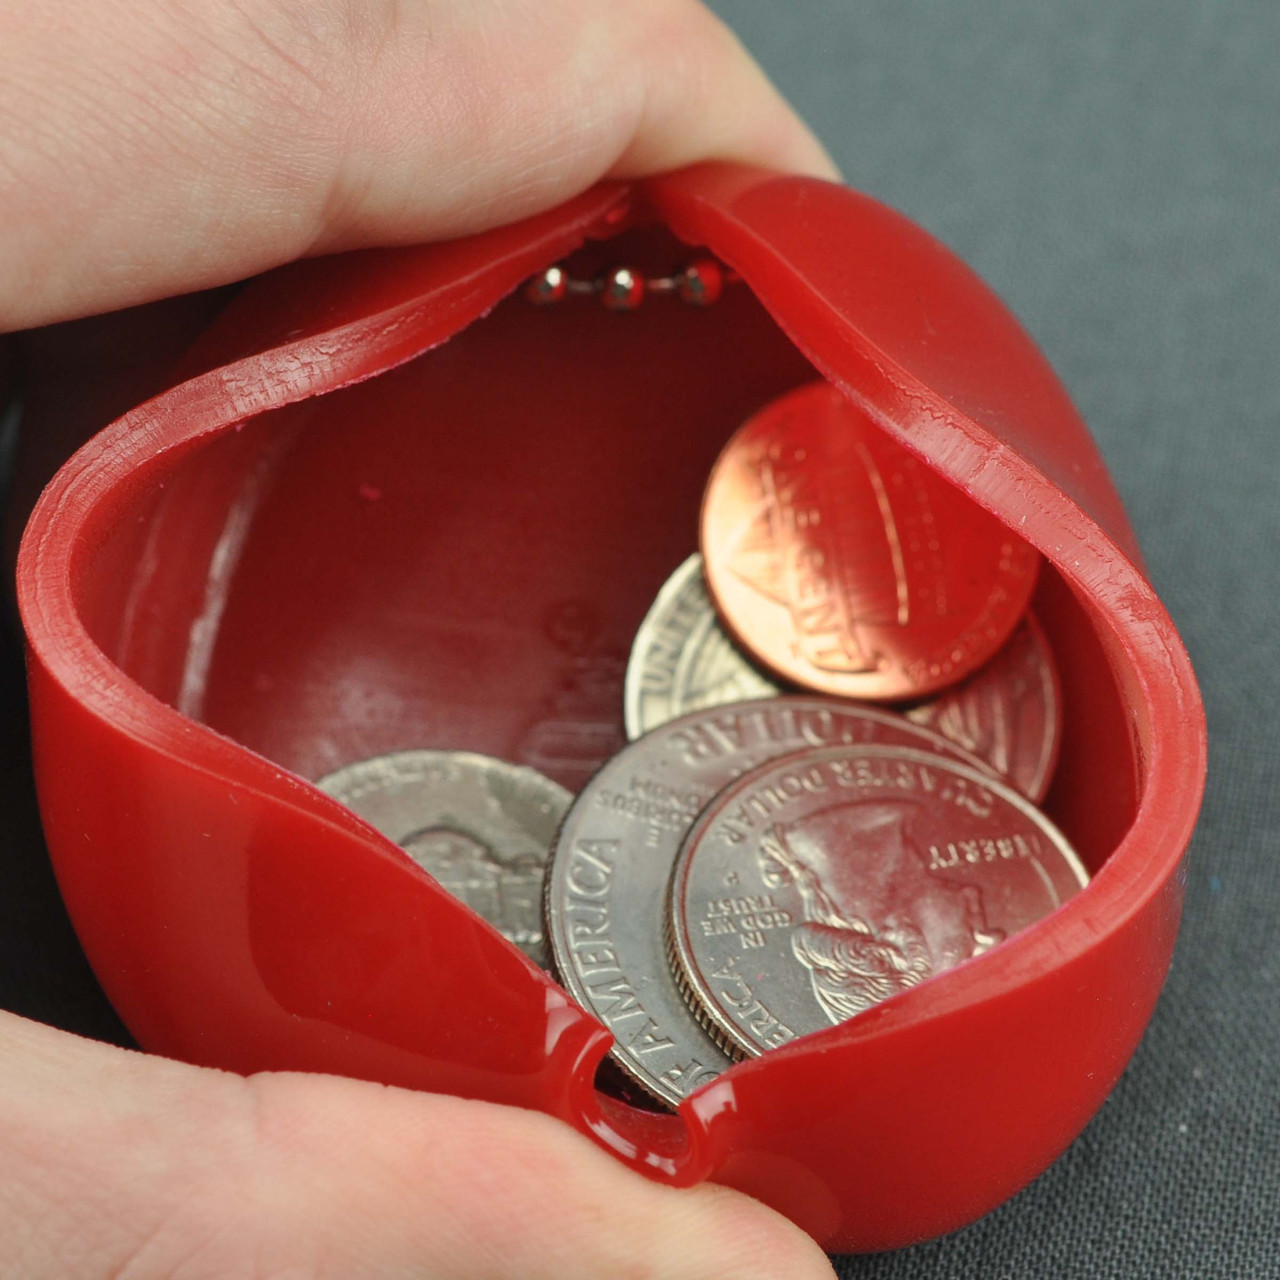 Shop for and Buy Squeeze Coin Purse Oval at . Large selection  and bulk discounts available.